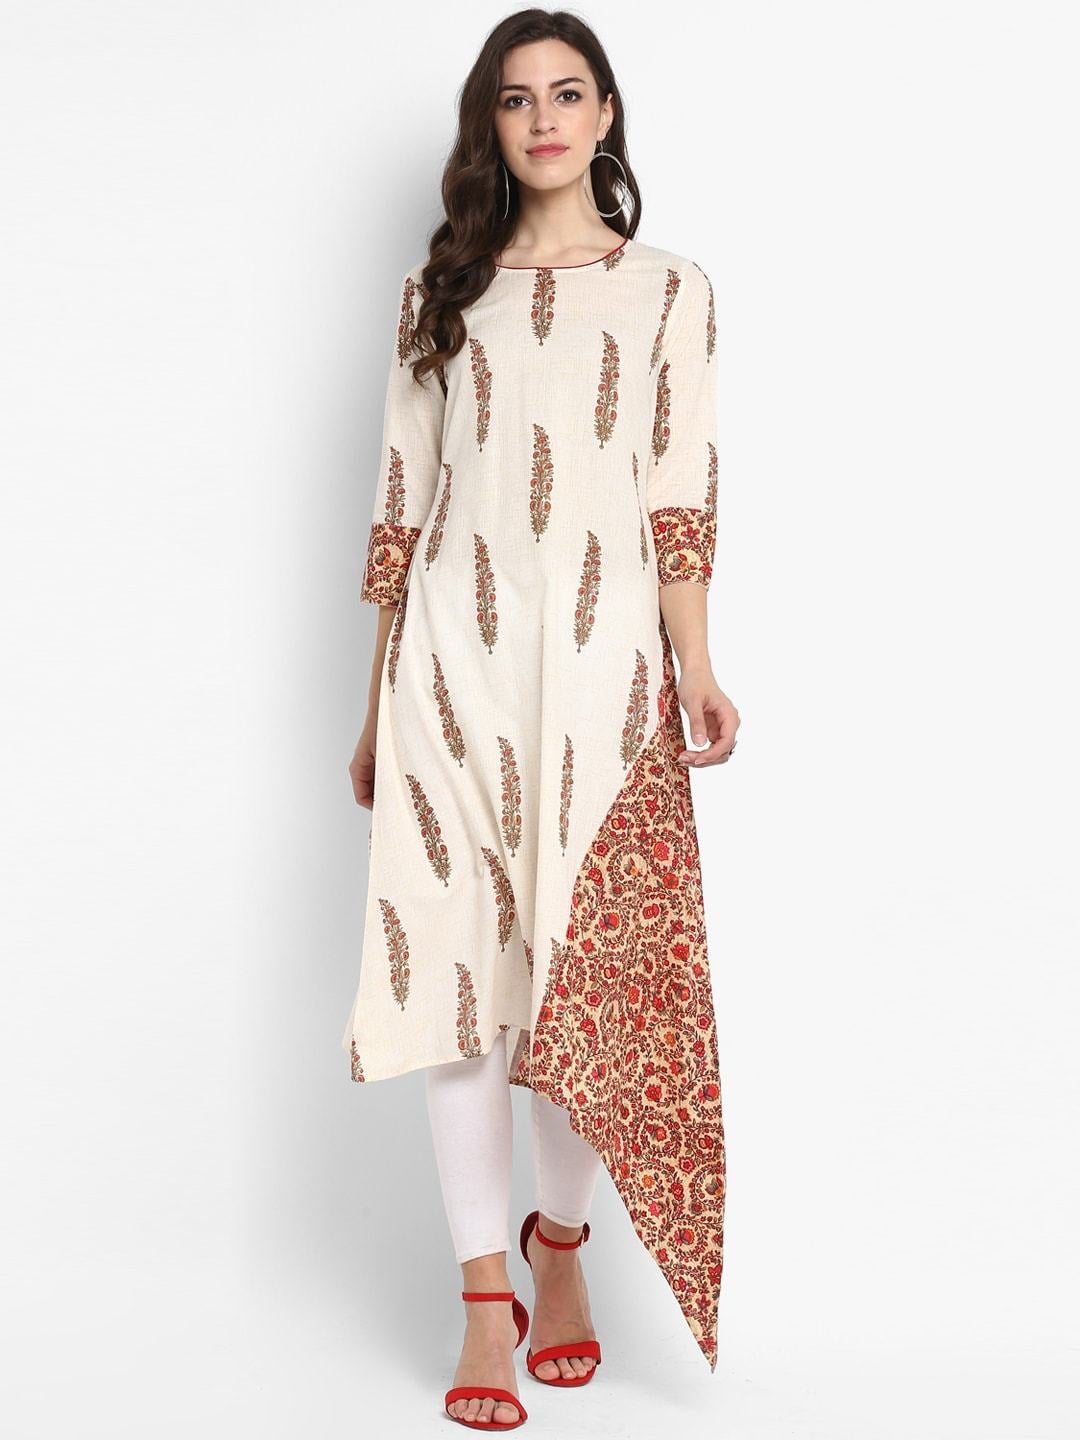 Women's Off-White & Red Floral Printed A-Line Kurta - Meeranshi